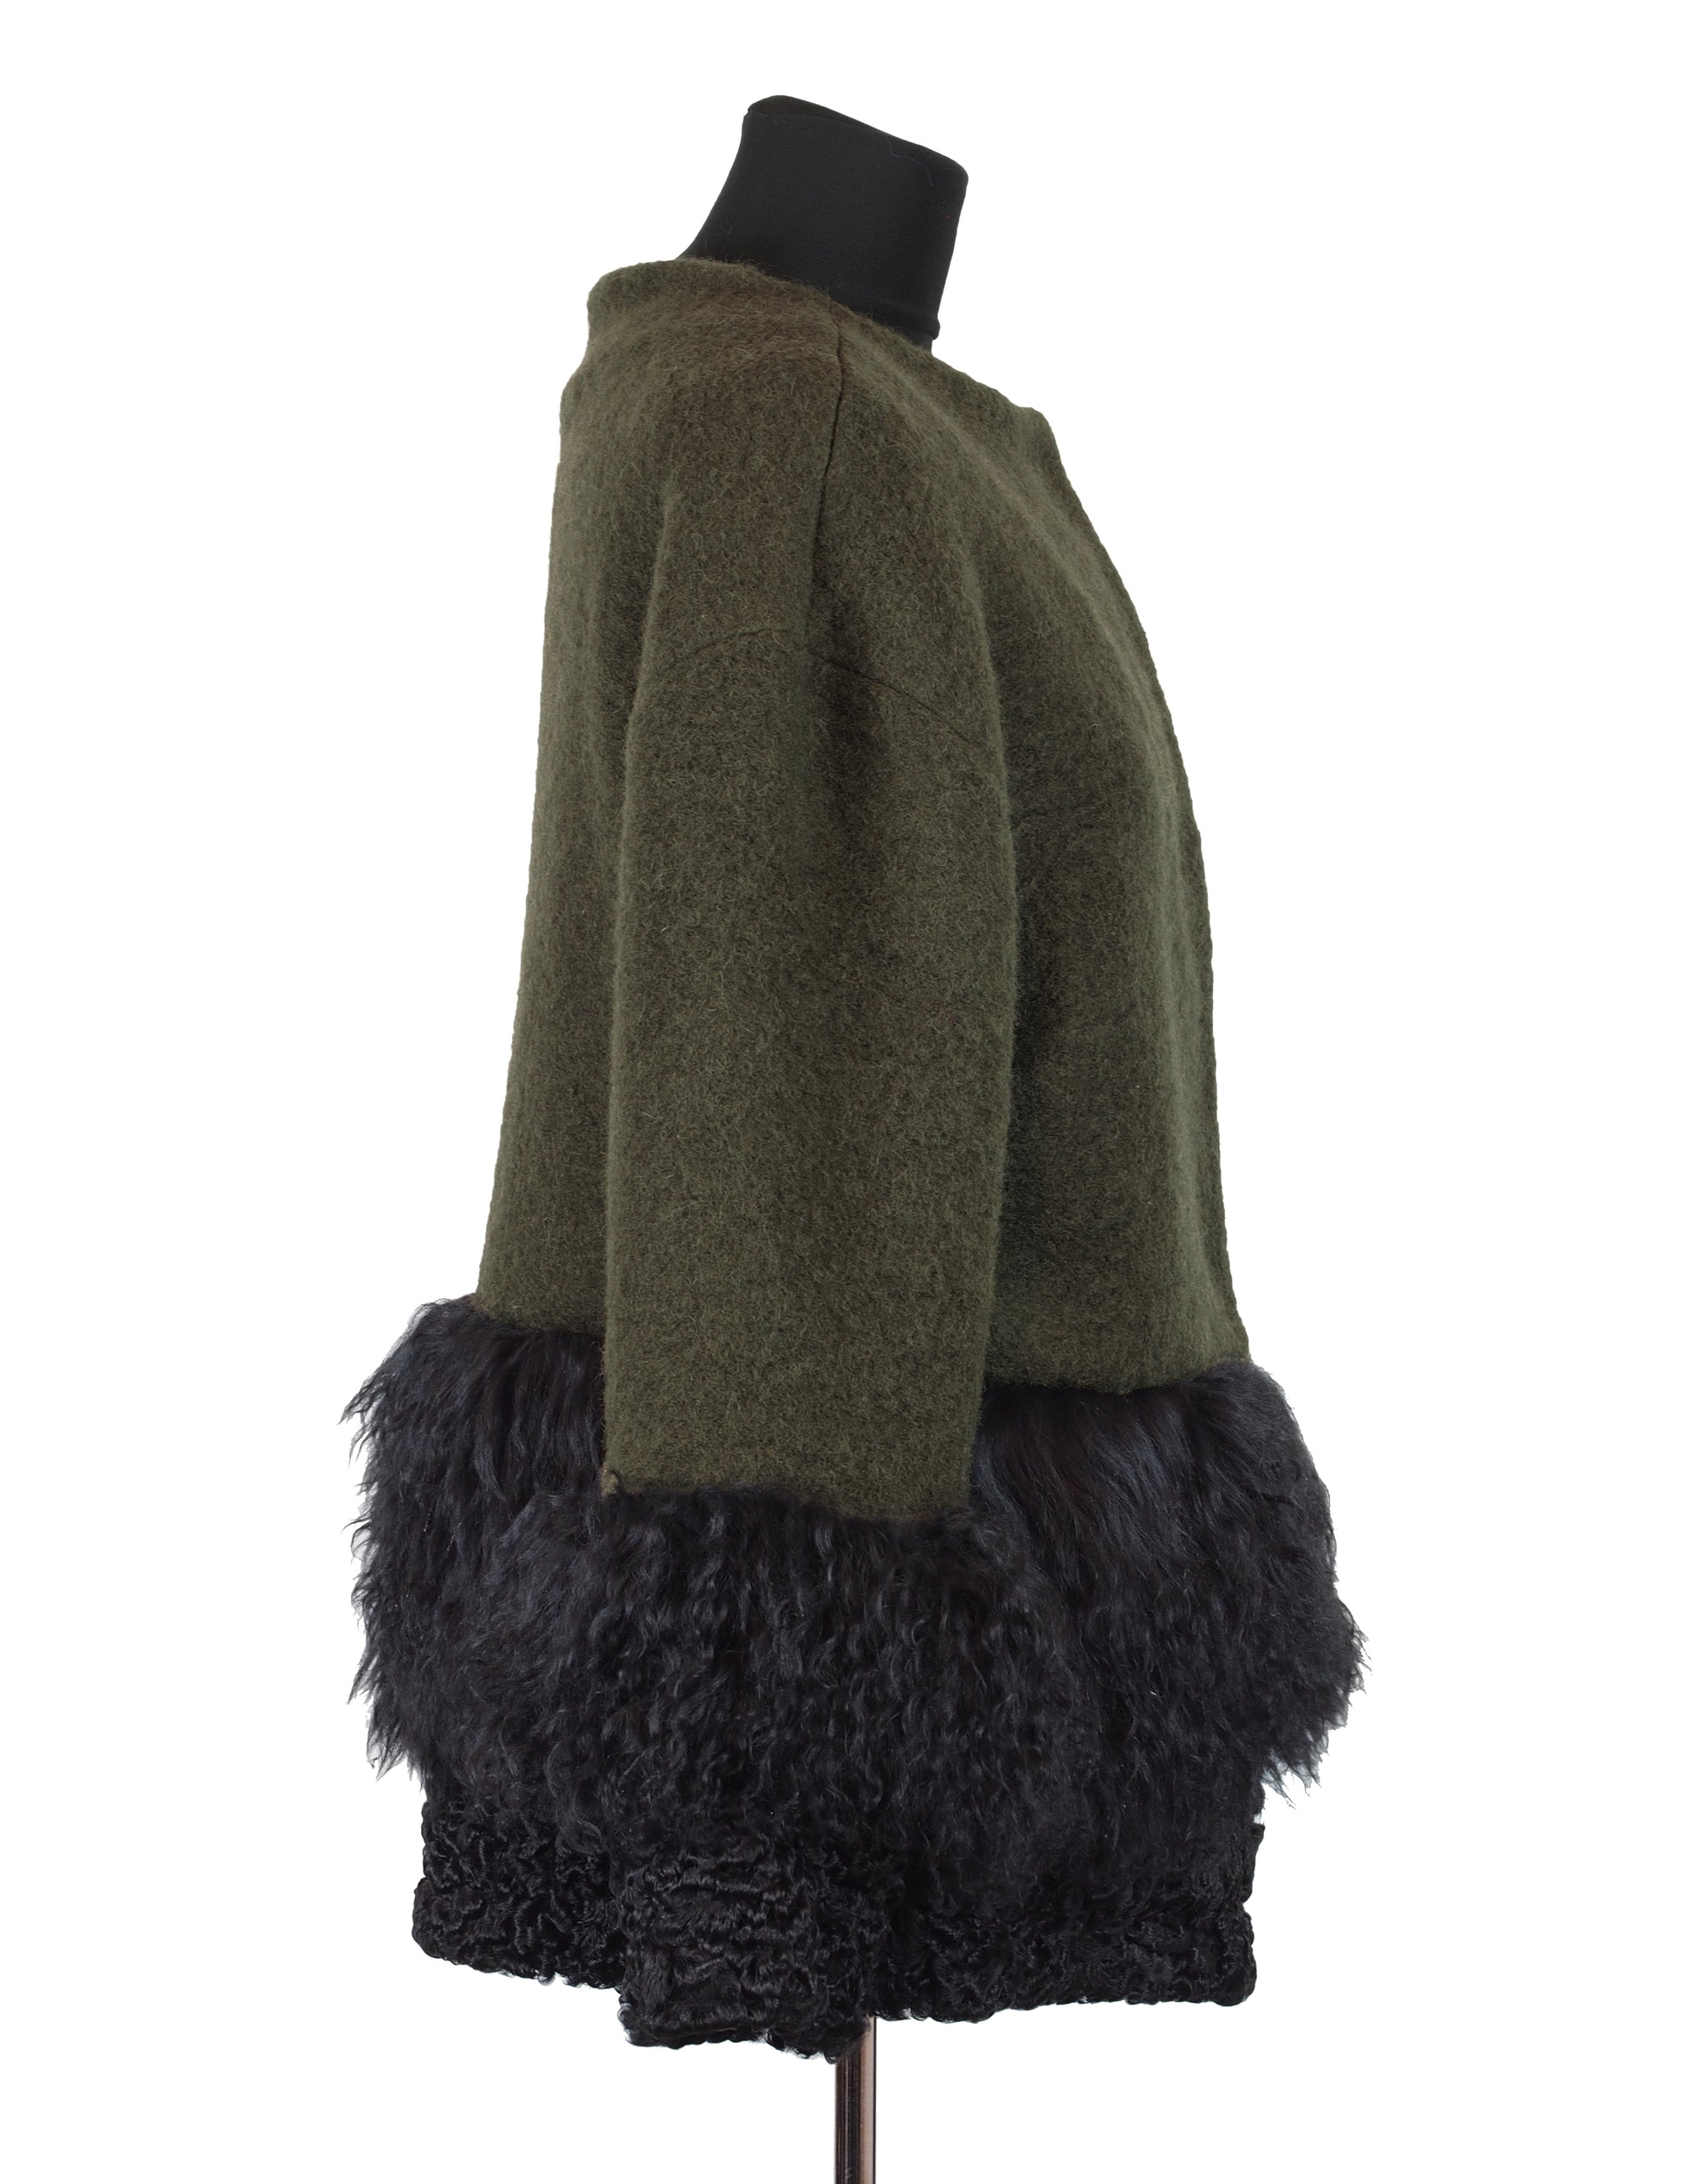 ONE OF A KIND OLIVE GREEN WOOL / FUR JACKET - CHRISTINA FISCHER